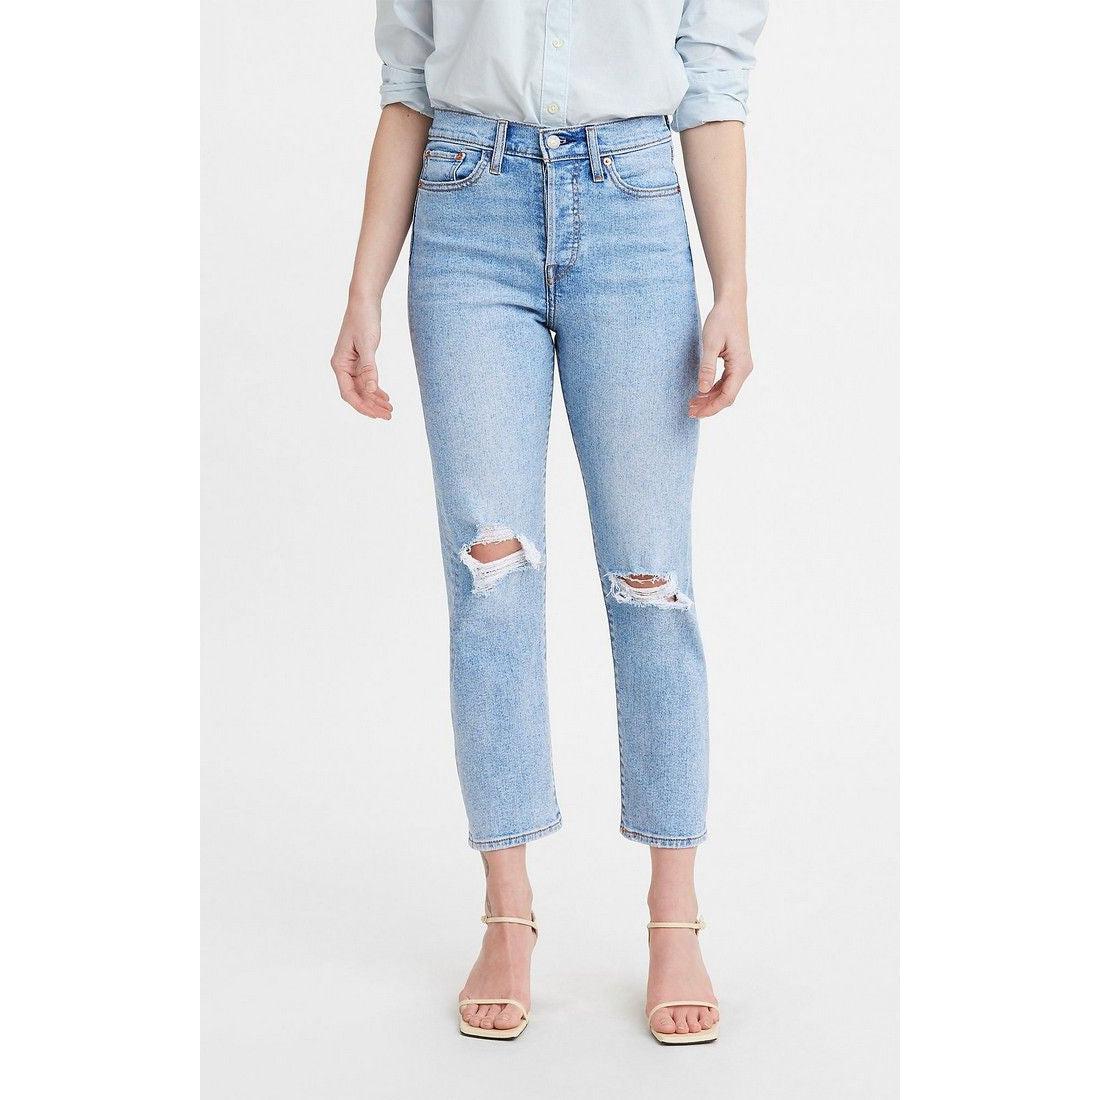 Product Name: Levi’s Women's Classic Straight Fit Jeans